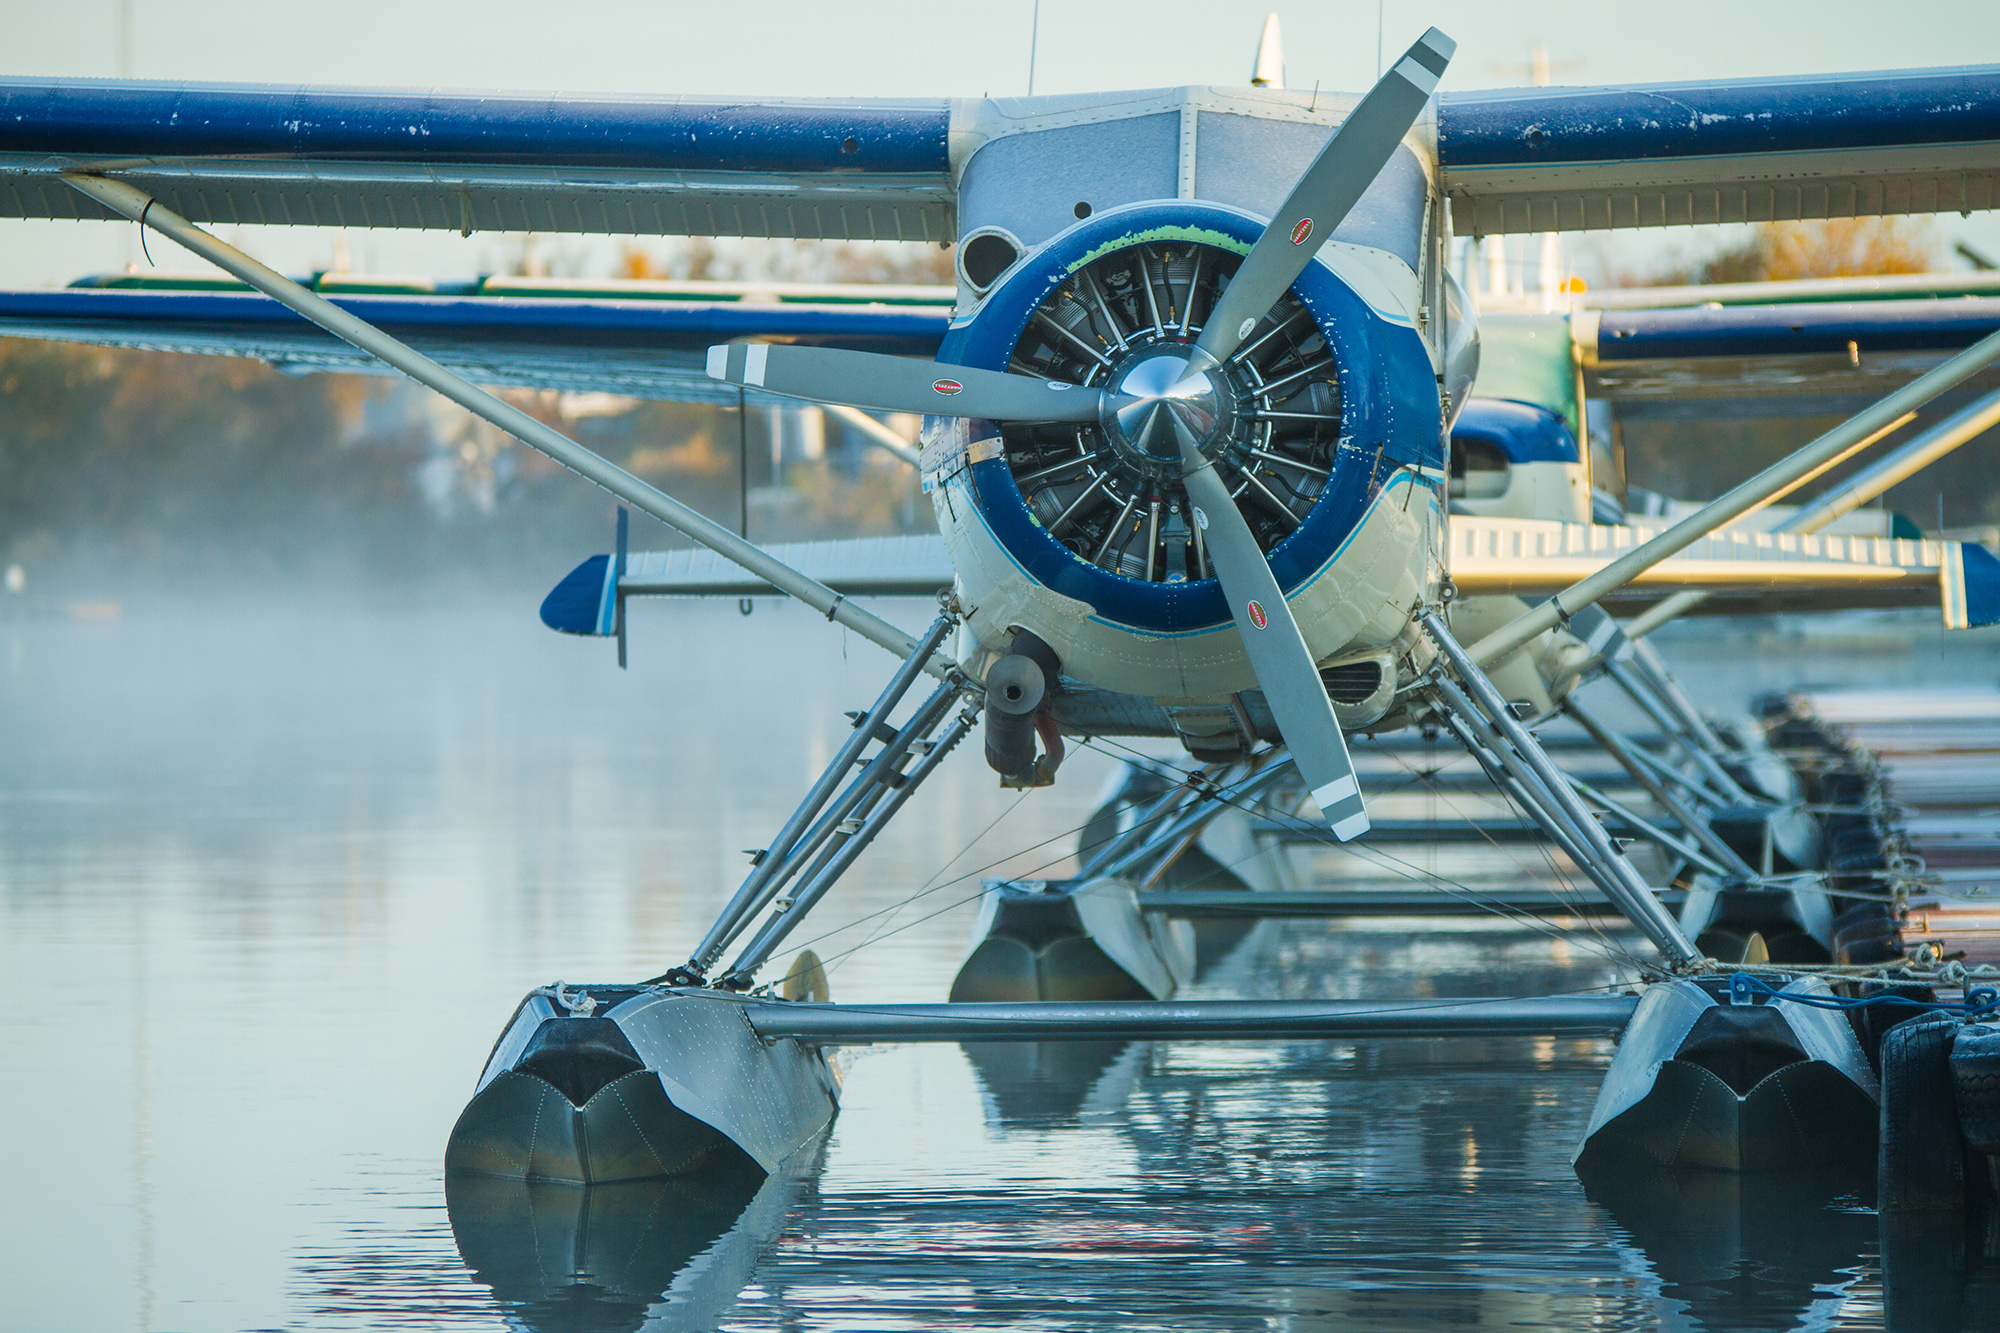 A float plane docked at a fishing lodge in Alaska.